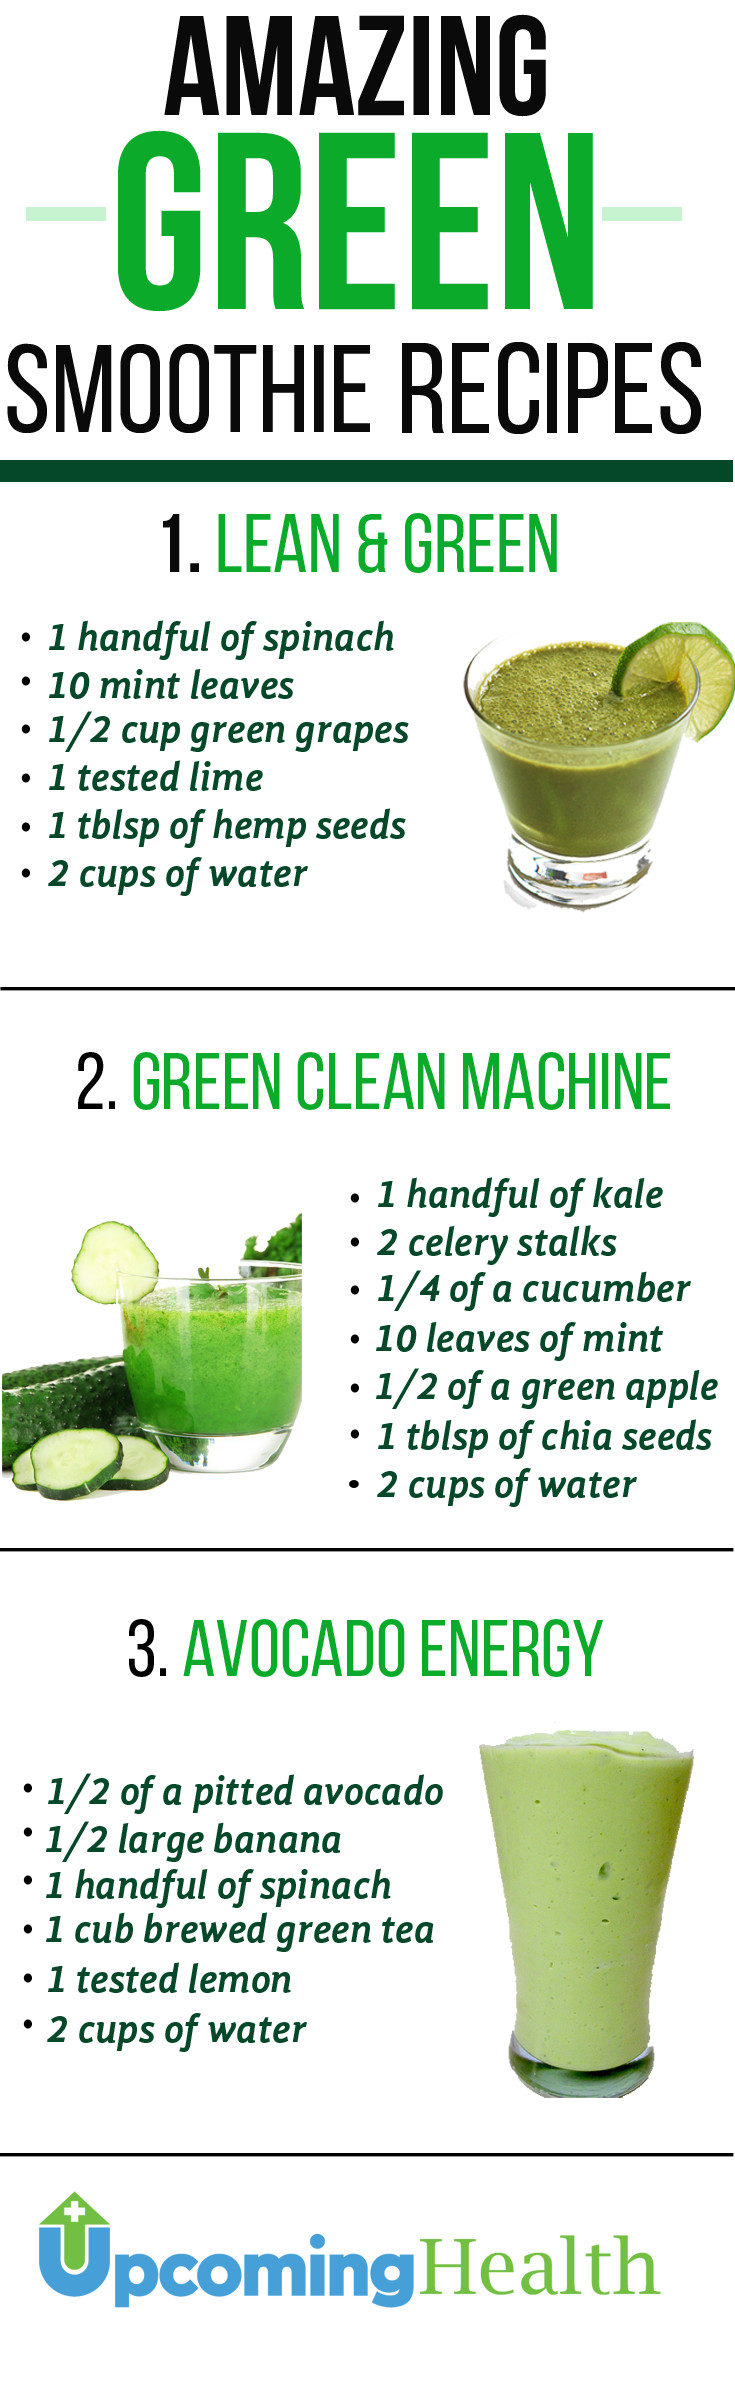 Green Smoothie Weight Loss Recipes
 Green Smoothies Will Revolutionize Your Health